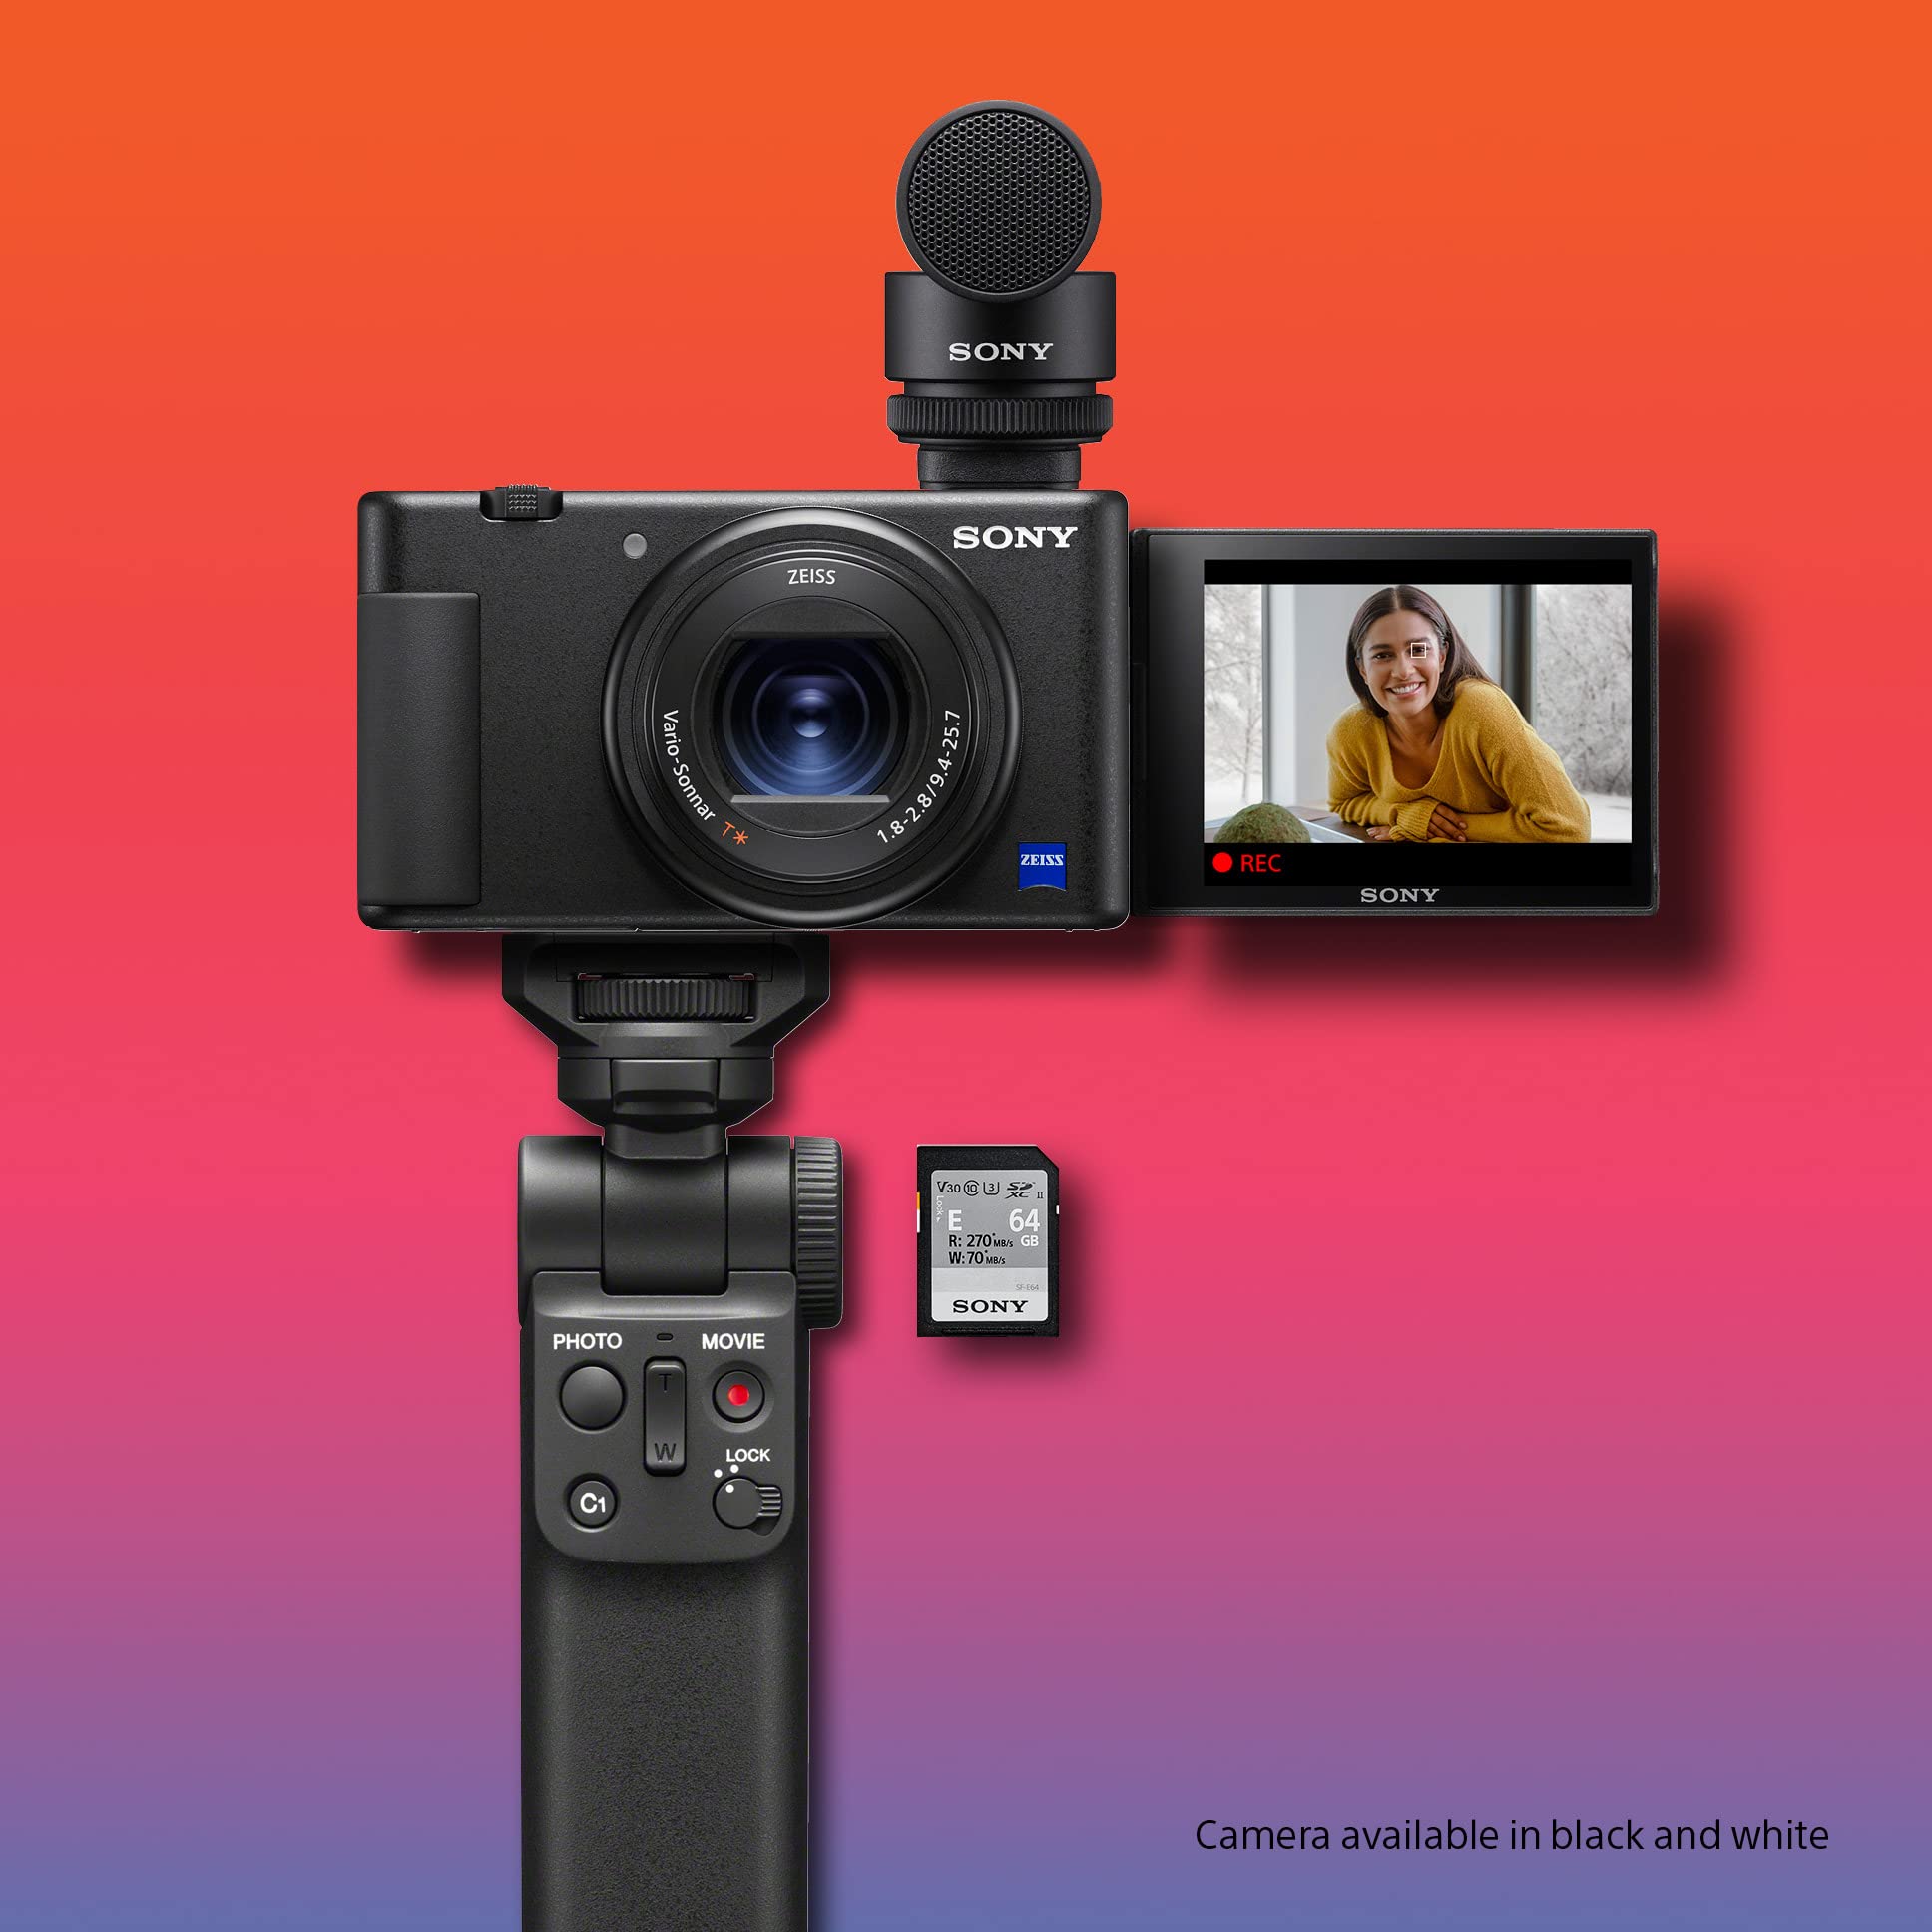 Sony ZV-1 Digital Camera for Content Creators, Vlogging and YouTube with Flip Screen, Built-in Microphone, 4K HDR Video, Touchscreen Display, Live Video Streaming, Webcam & Content Creator Kit